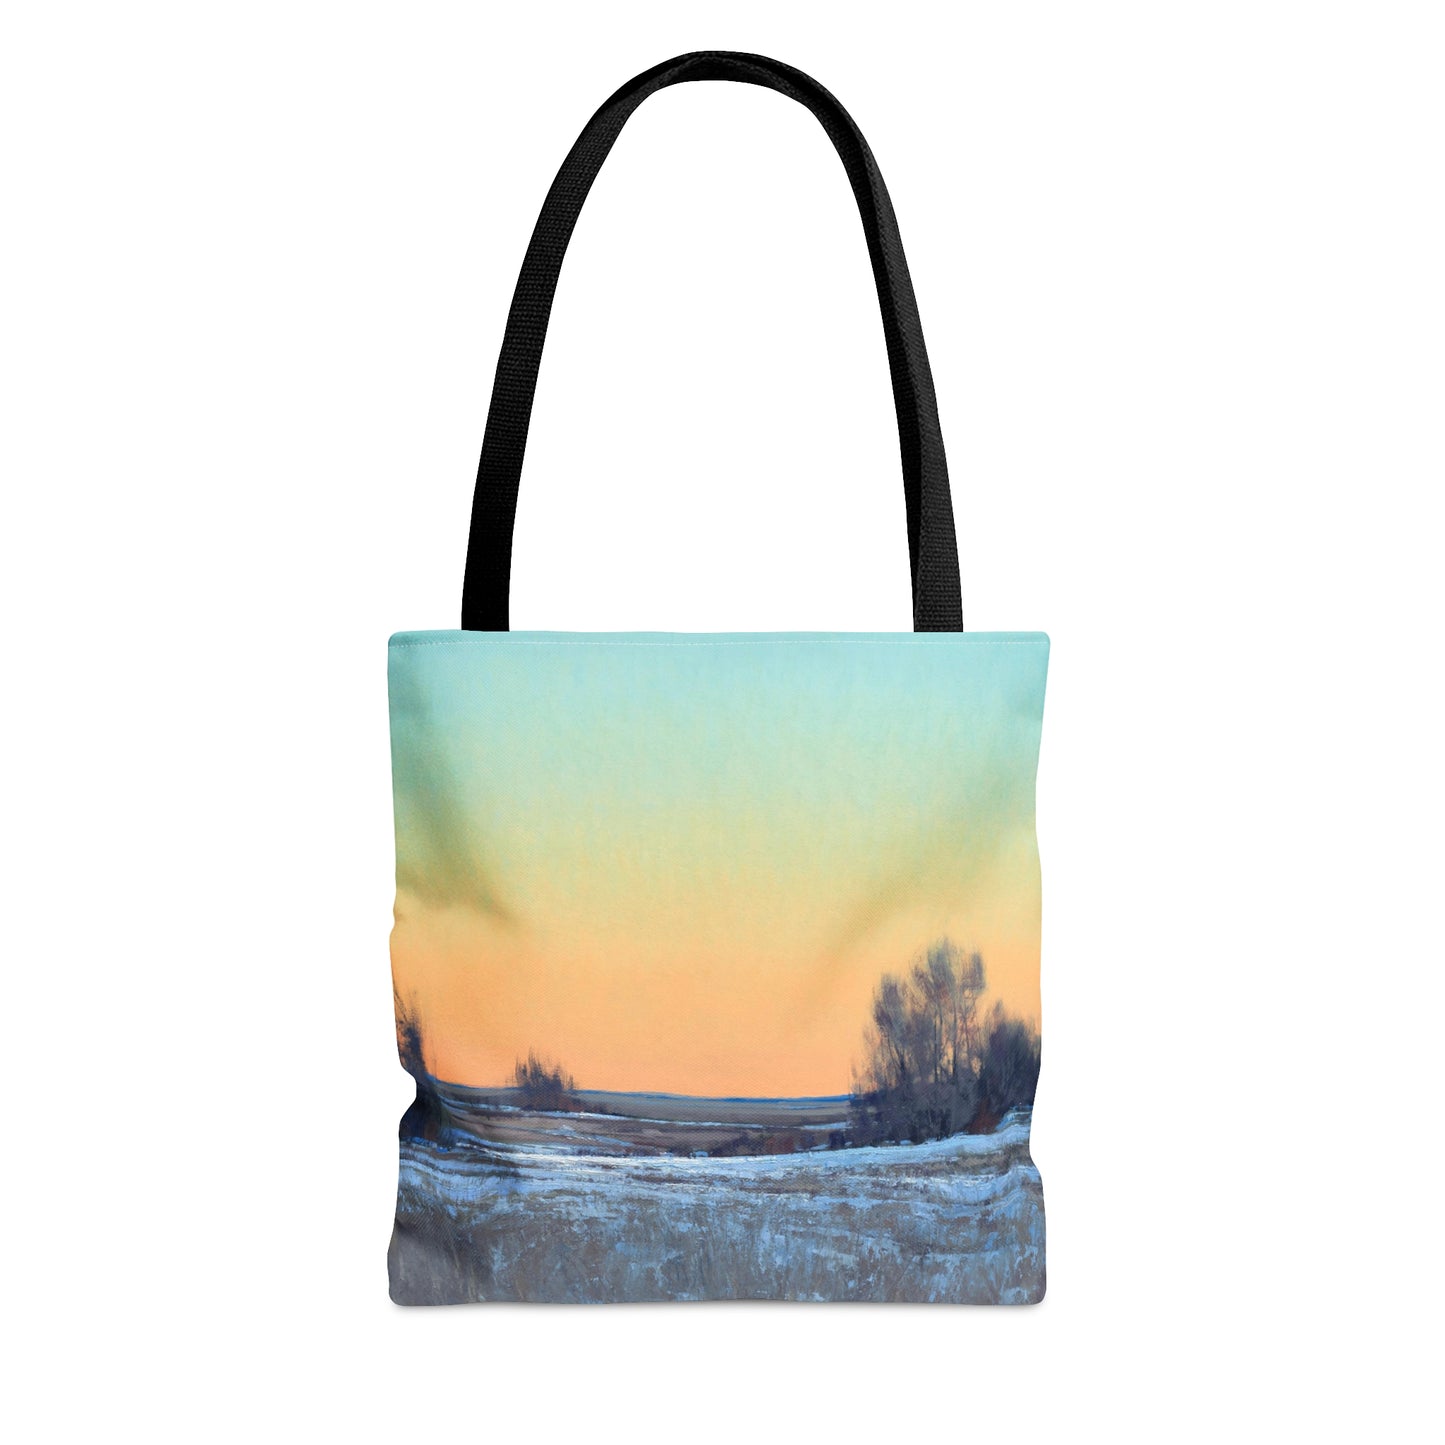 Ben Bauer: "Late Afternoon in March, Lowry, MN" - AOP Tote Bag